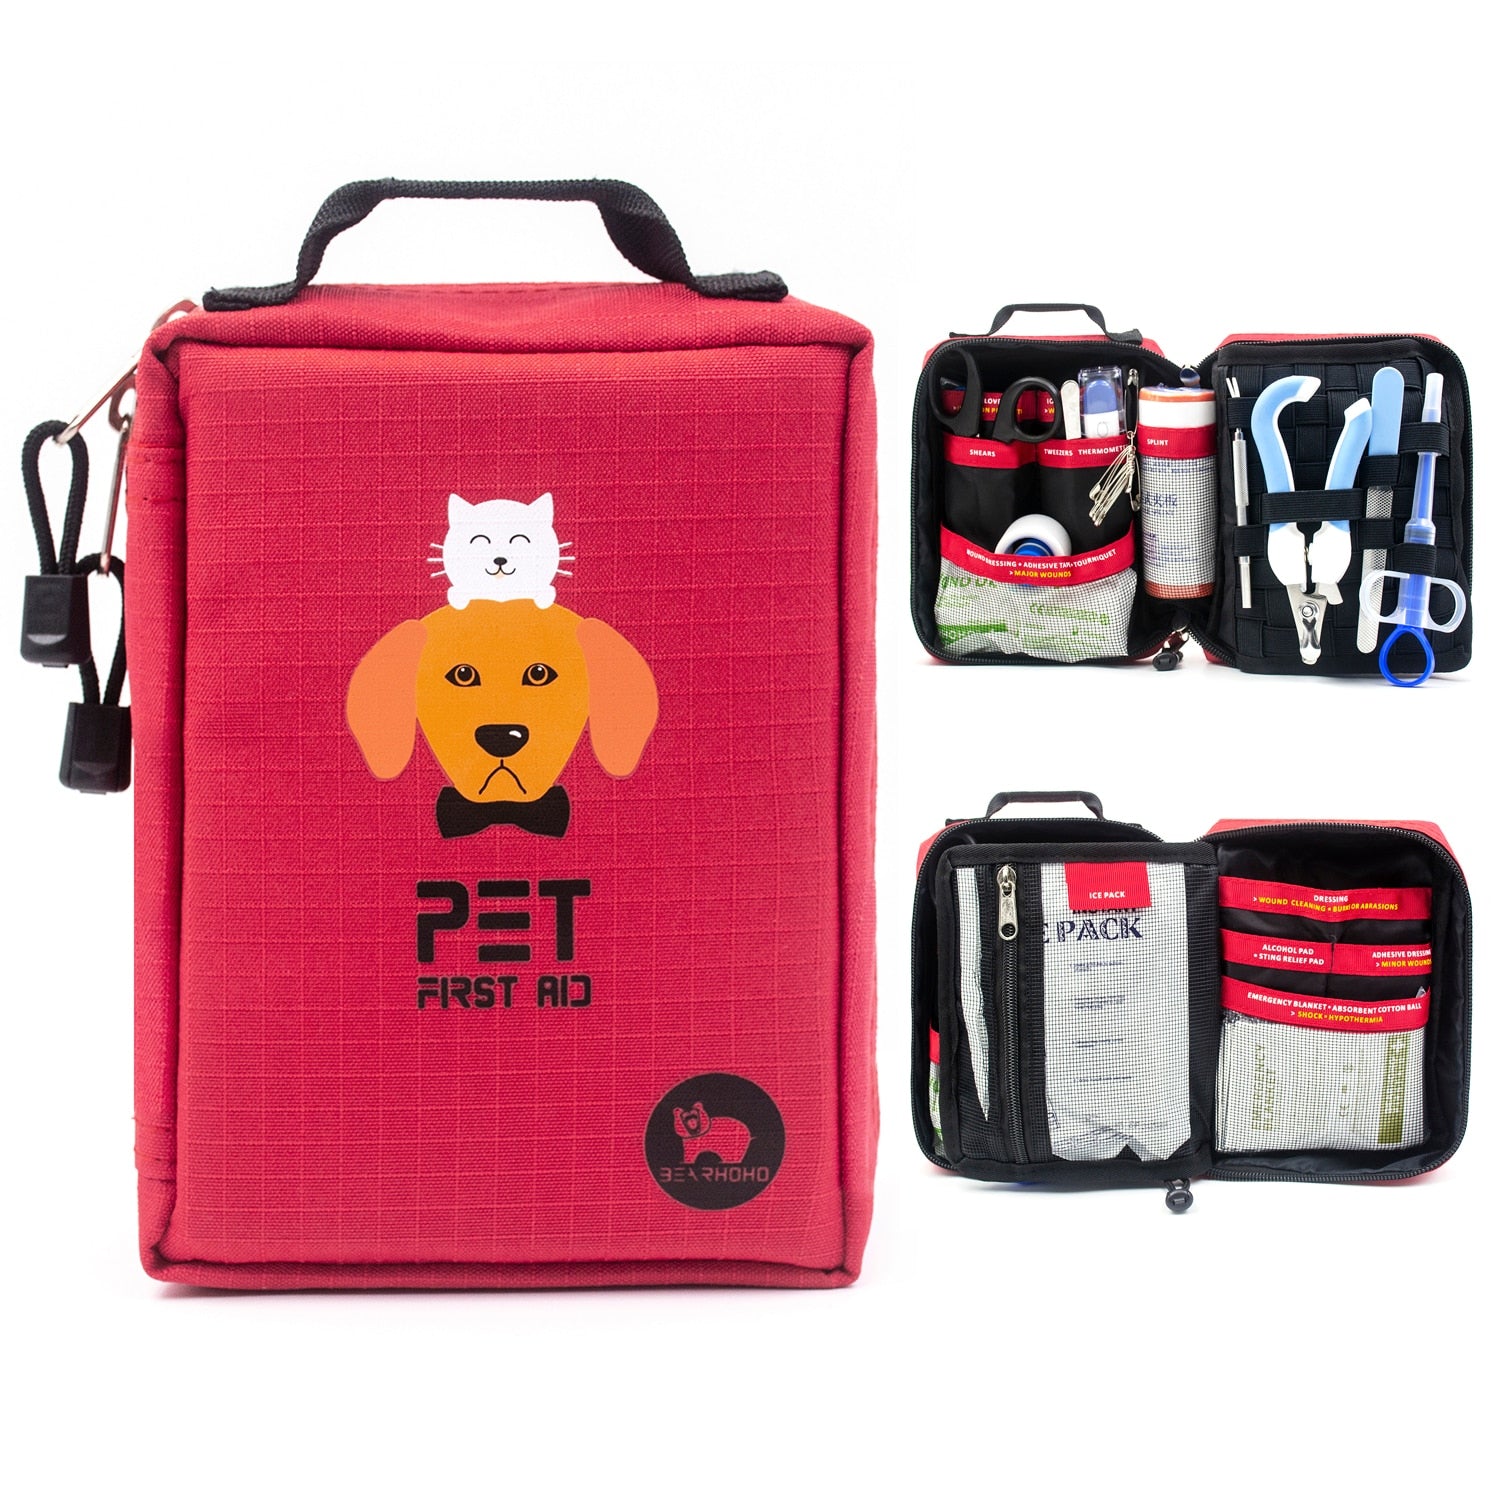 Dog/Cat First Aid Kit, 160pcs w/Lightweight Waterproof Case, Perfect For Camping!